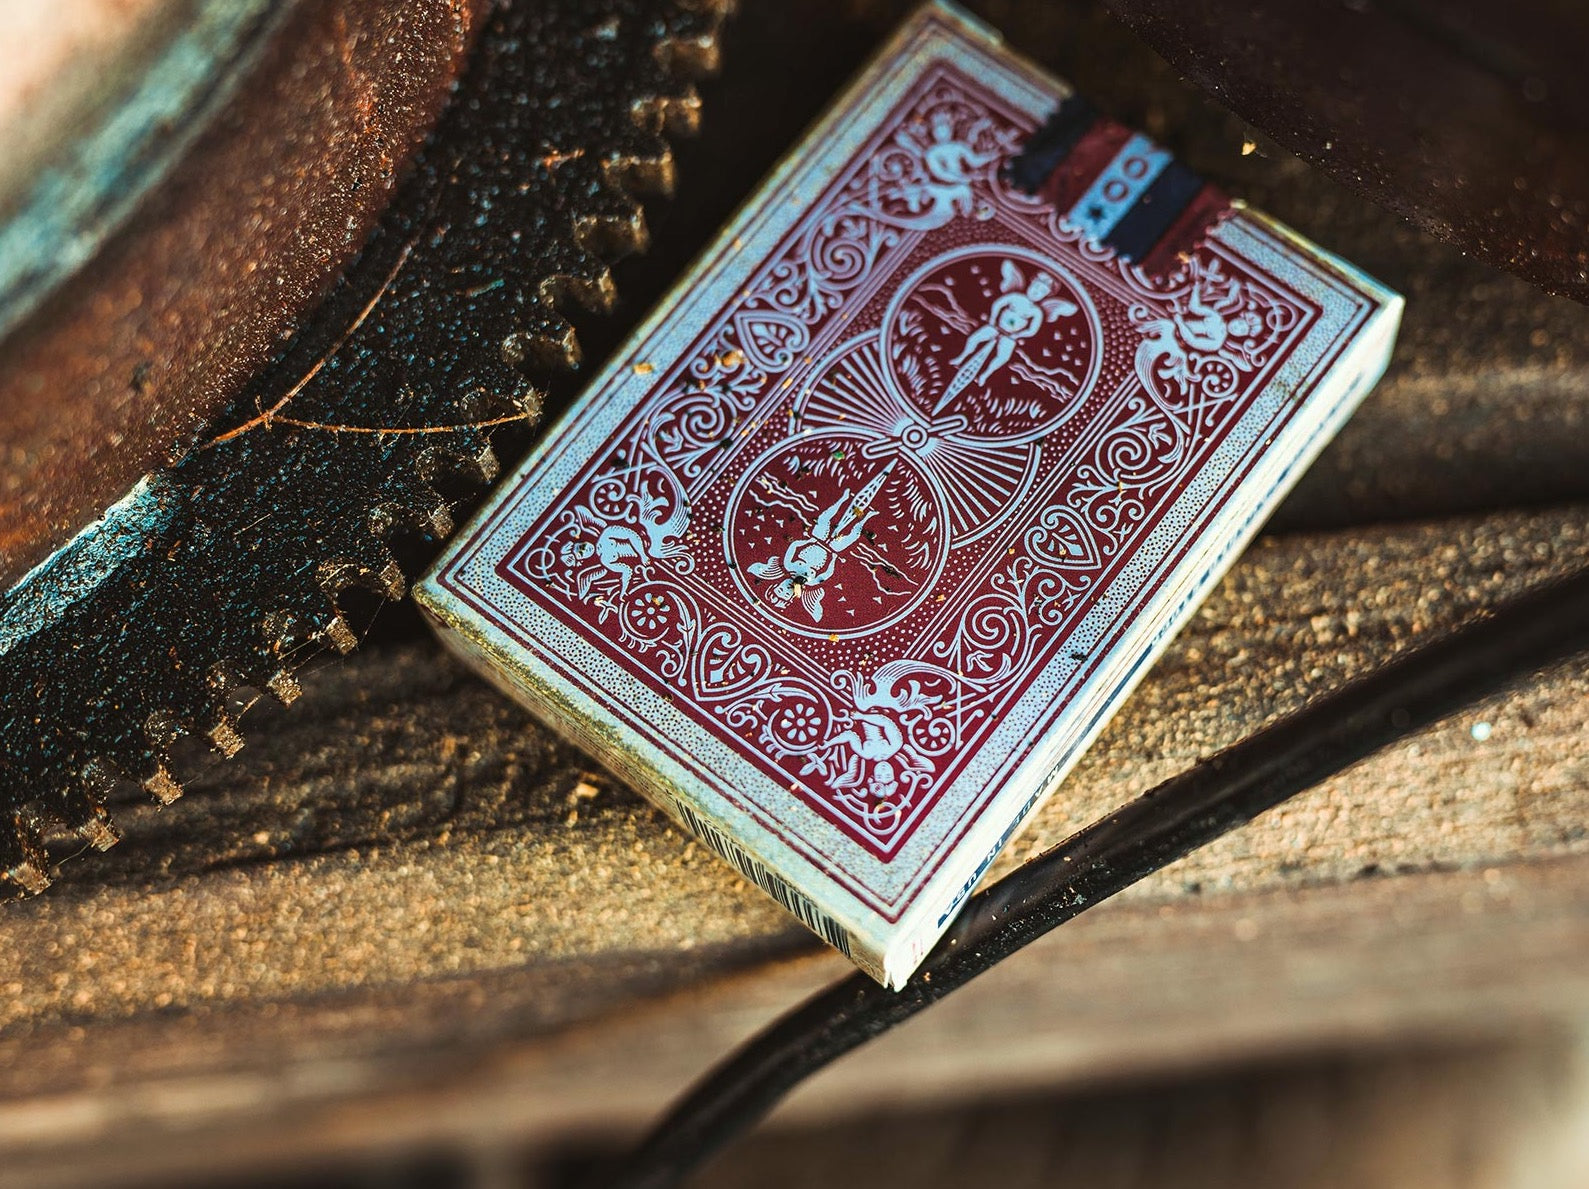 Bicycle 1900 - Red by Ellusionist | Ellusionist